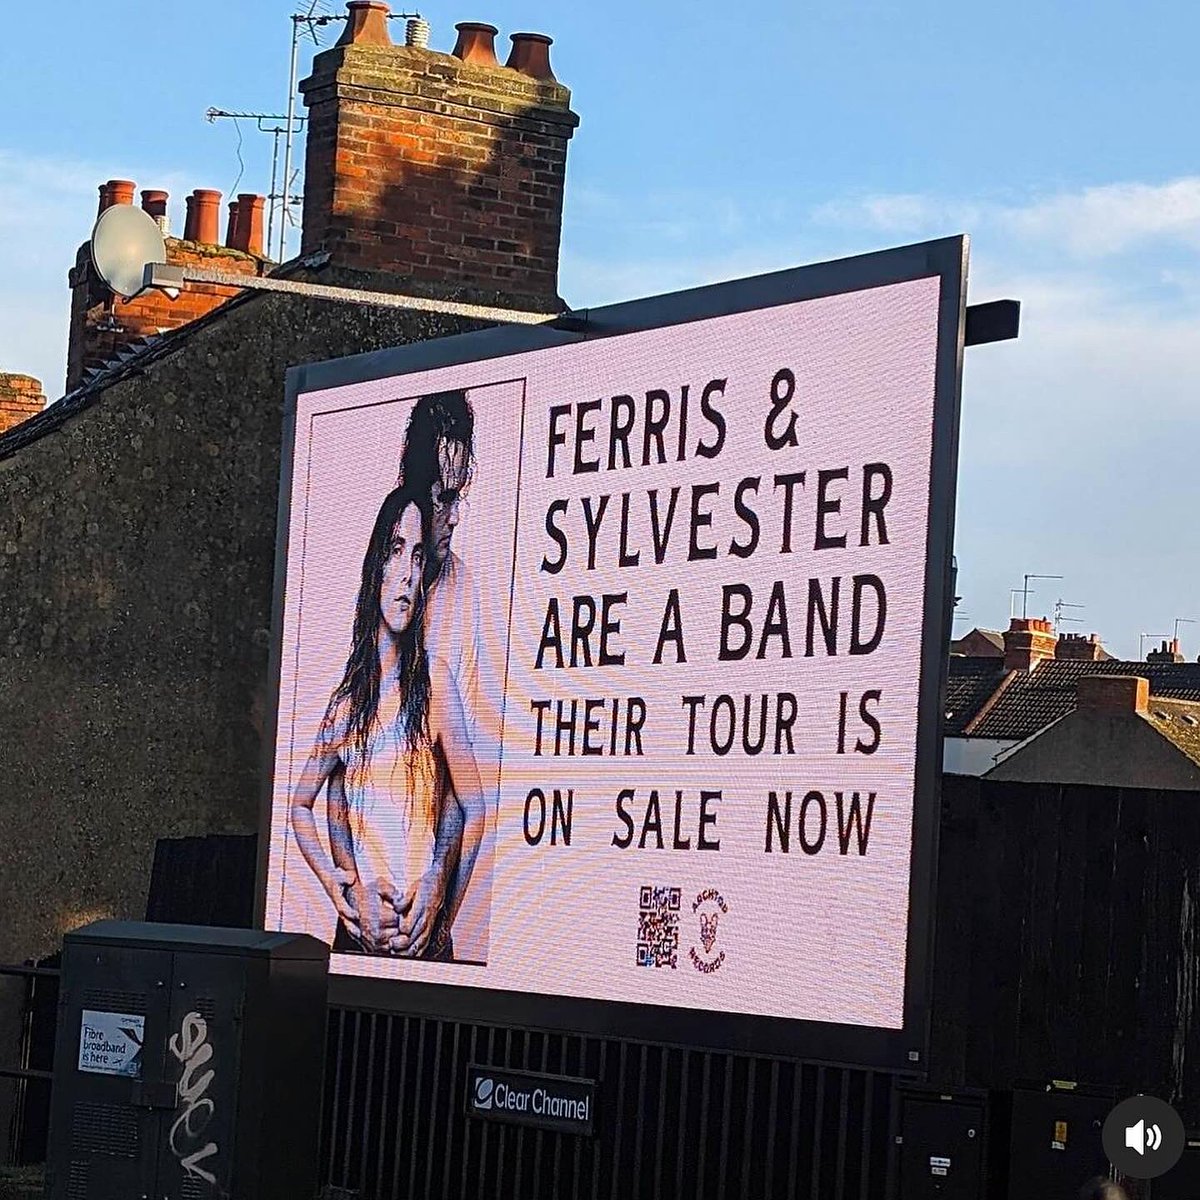 Still not used to this 👀🥹♥️ Anyone seen us around??? Keep sharing your snaps, this is nuts. PS, we’ve made it to Scotland 🏴󠁧󠁢󠁳󠁣󠁴󠁿 we play @kingtuts tonight, come along 💫 ferrisandsylvester.com/tour